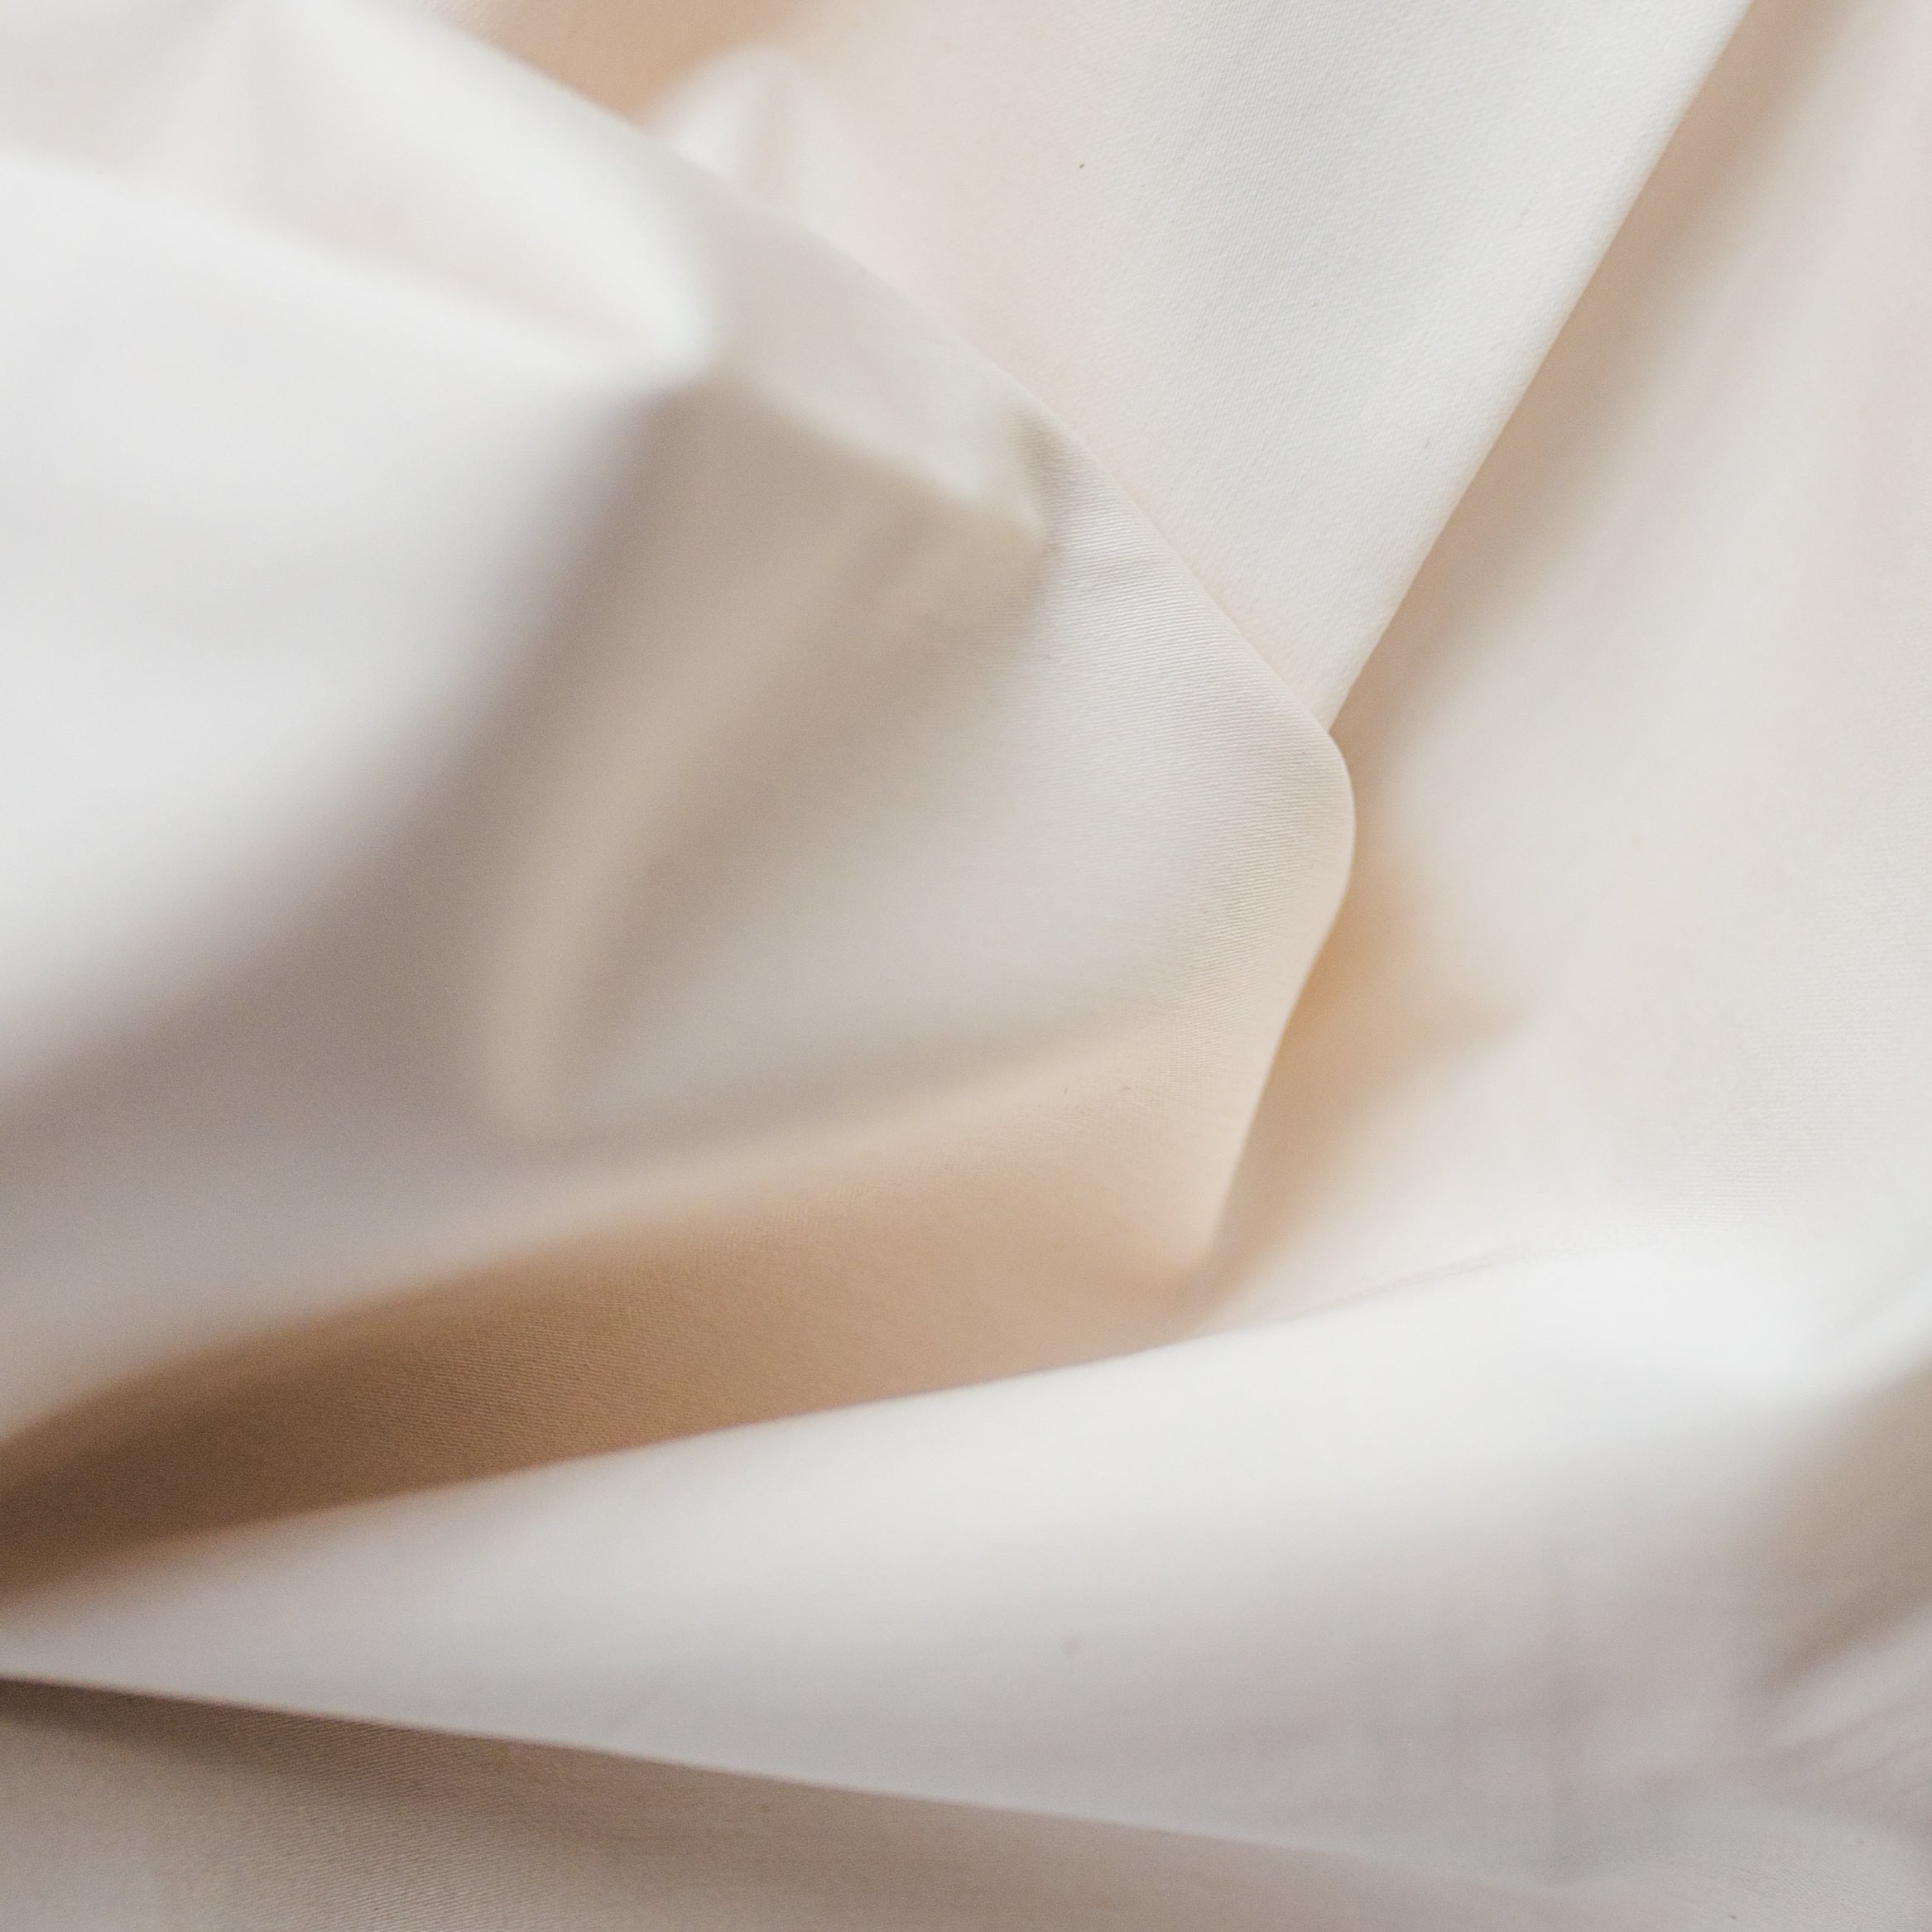 Detail view of the sateen fabric texture and softness, shown in the natural color of undyed and unbleached cotton.